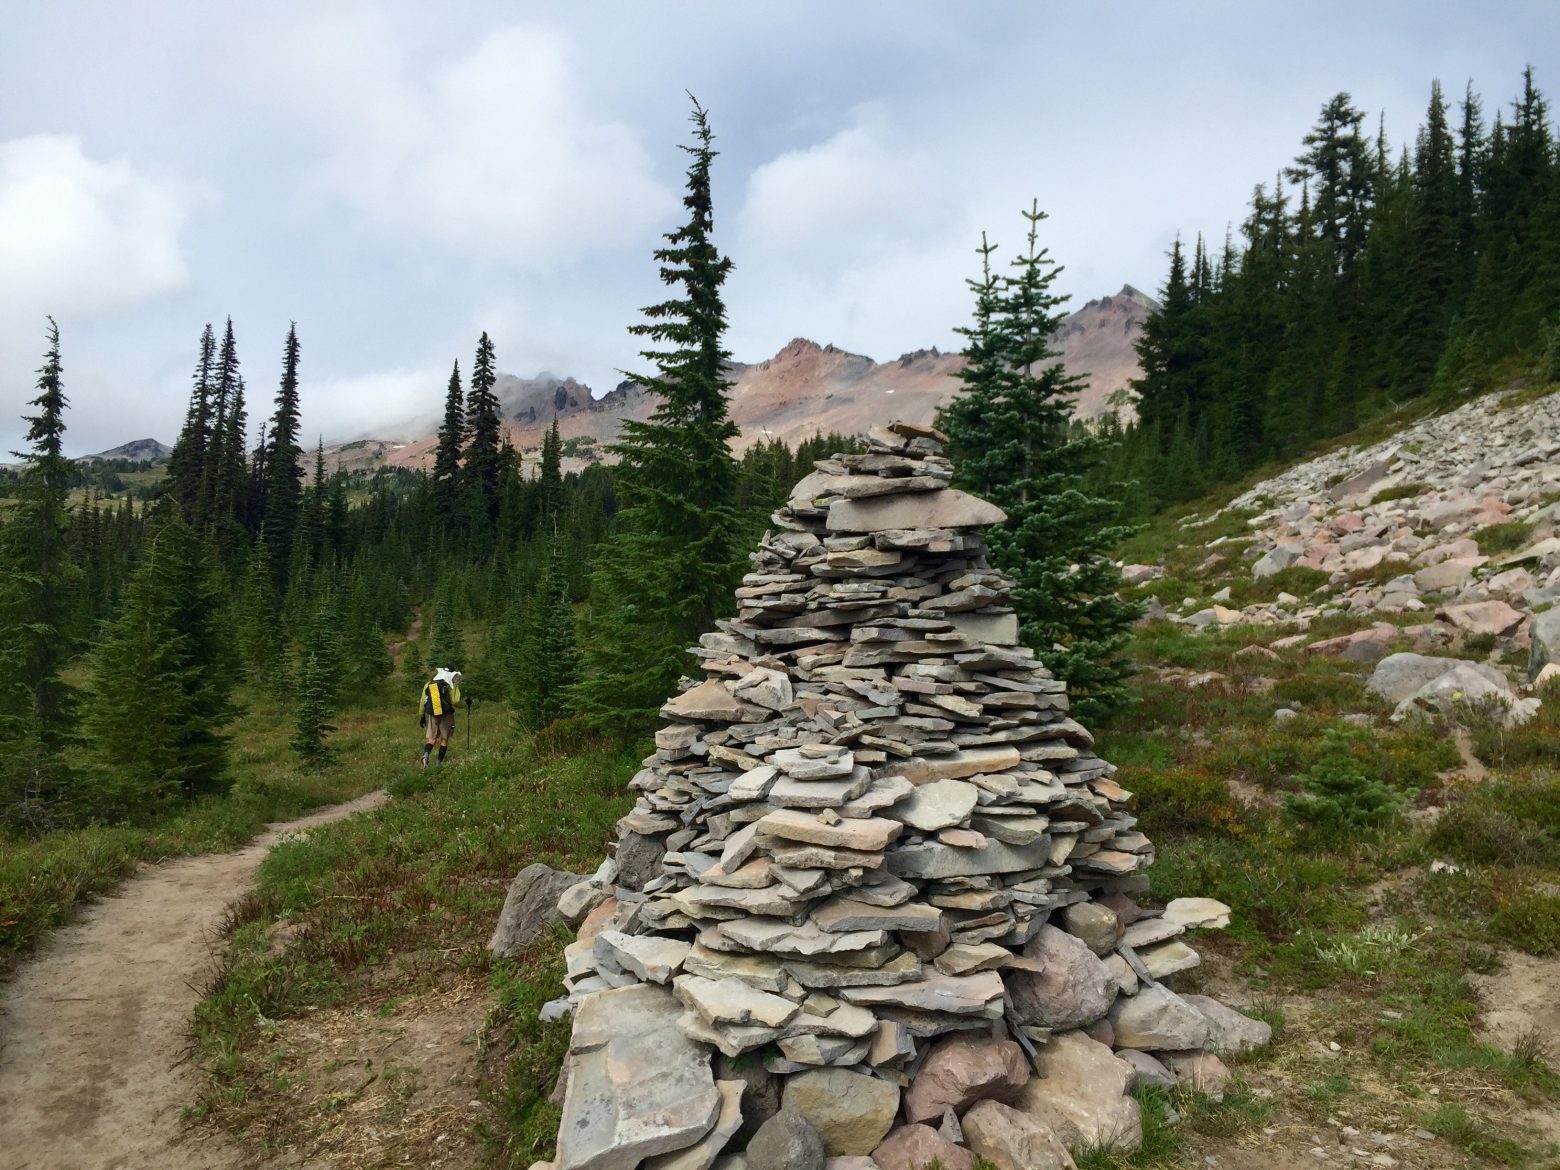 Giant rock cairn next to the Pacific Crest Trail in Goat Rocks Wilderness